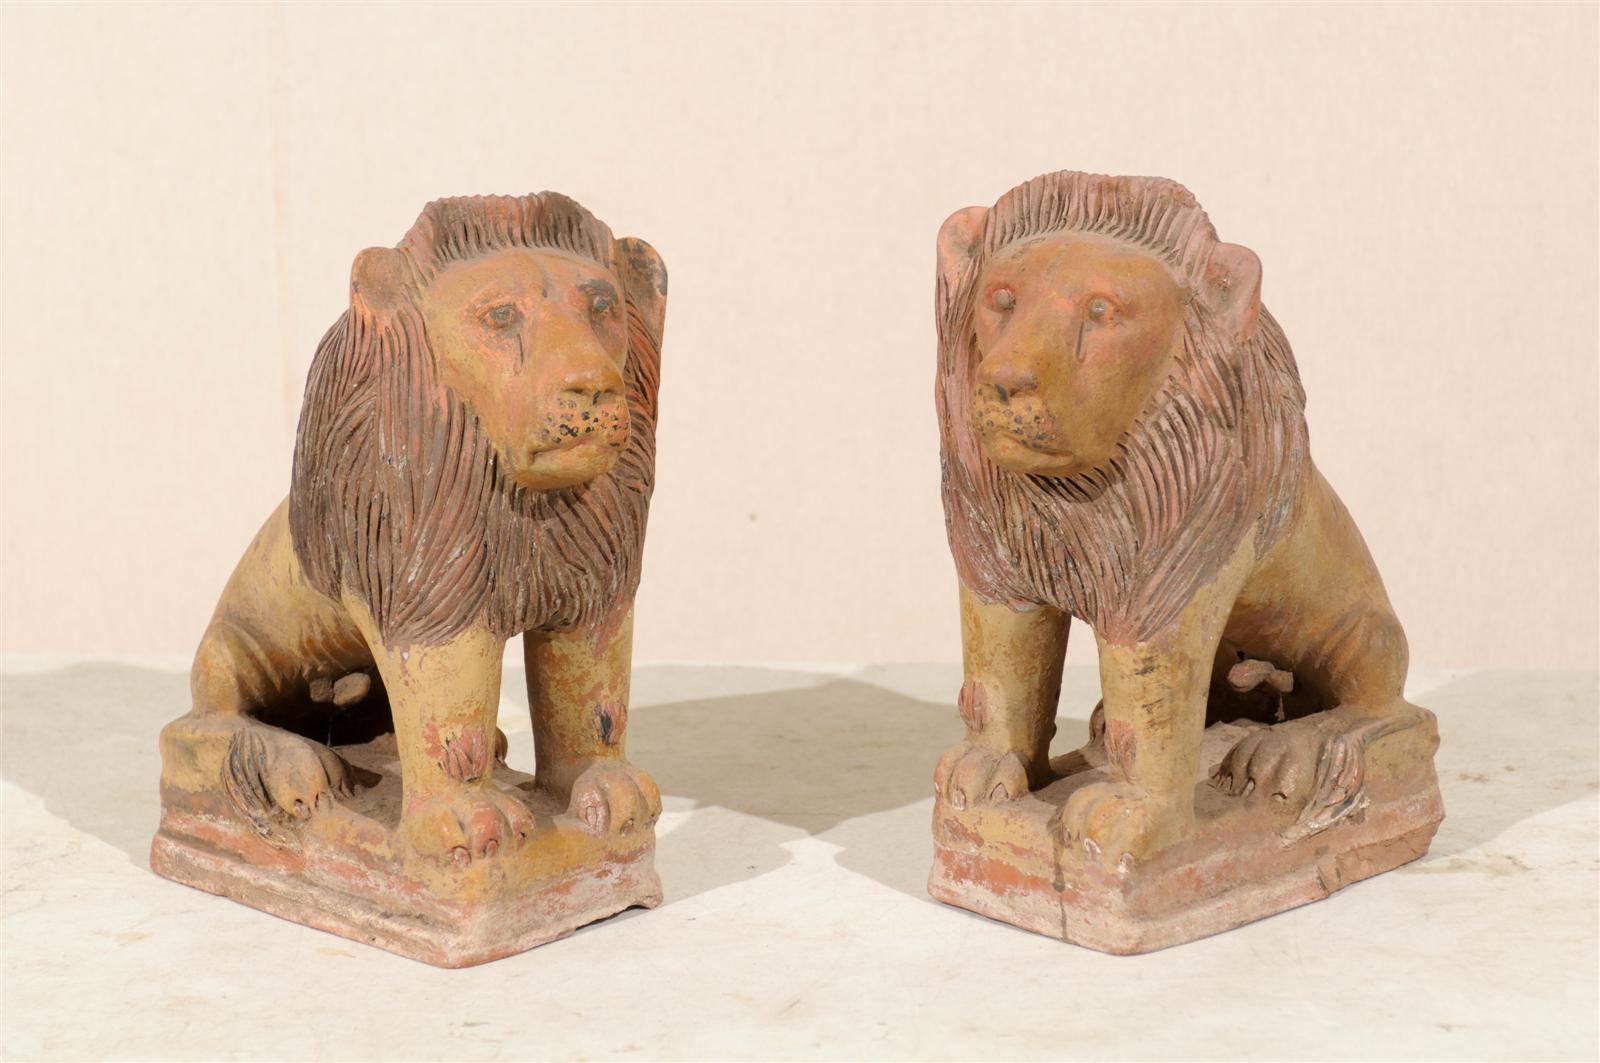 A pair of British colonial terracotta lions. This majestic pair of painted terracotta lions from the early 20th century will bring an air of regalness to any room.